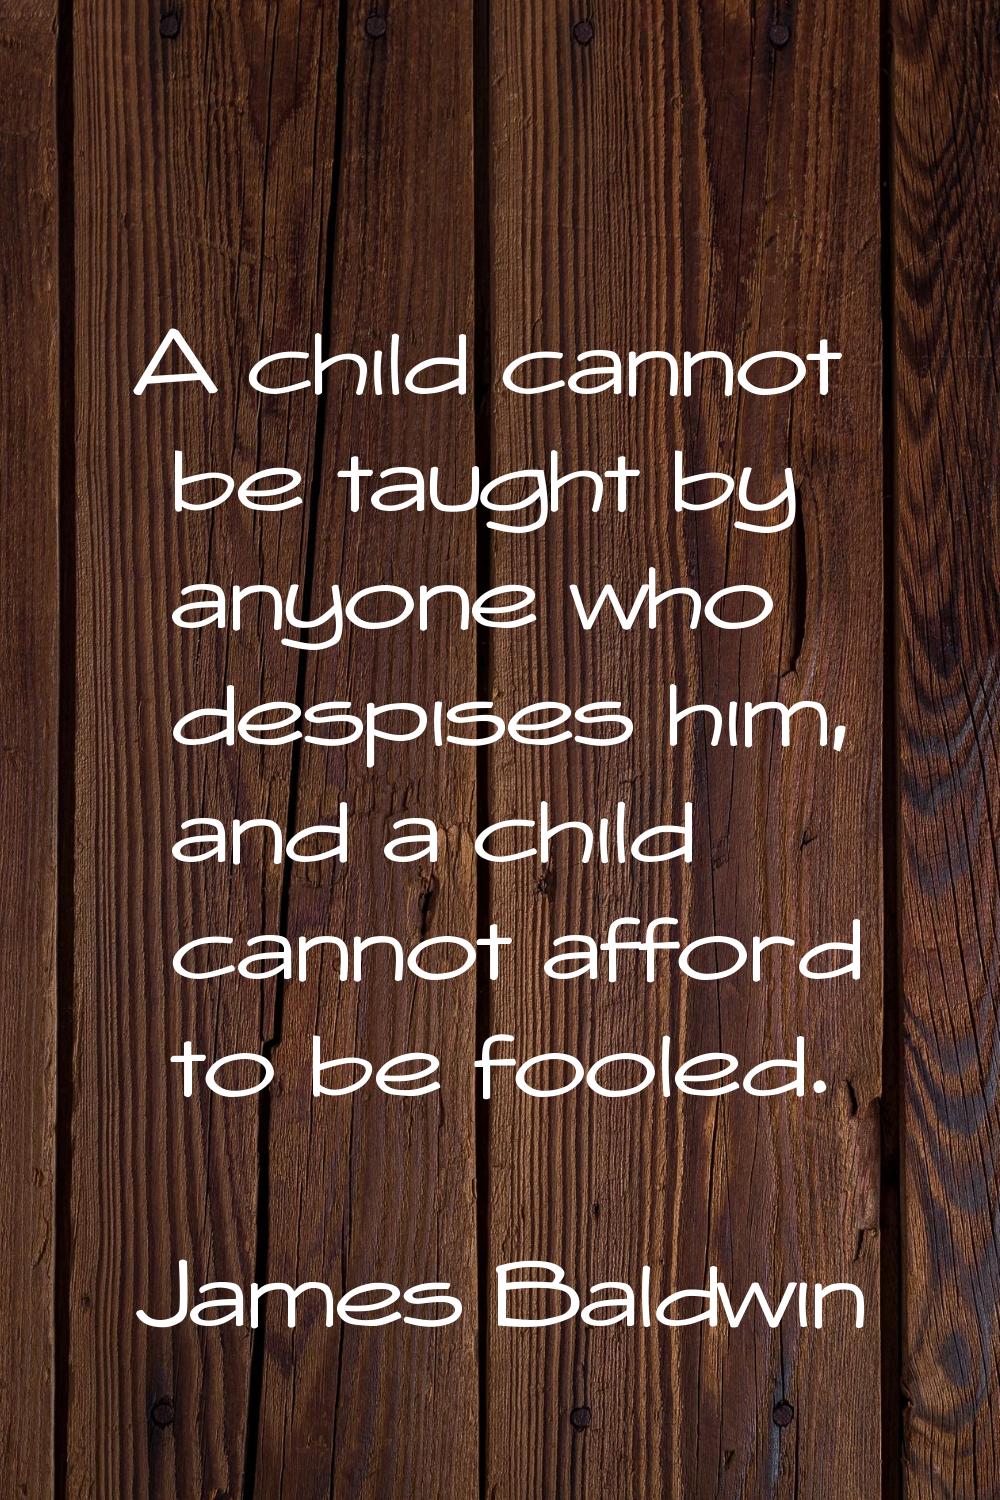 A child cannot be taught by anyone who despises him, and a child cannot afford to be fooled.